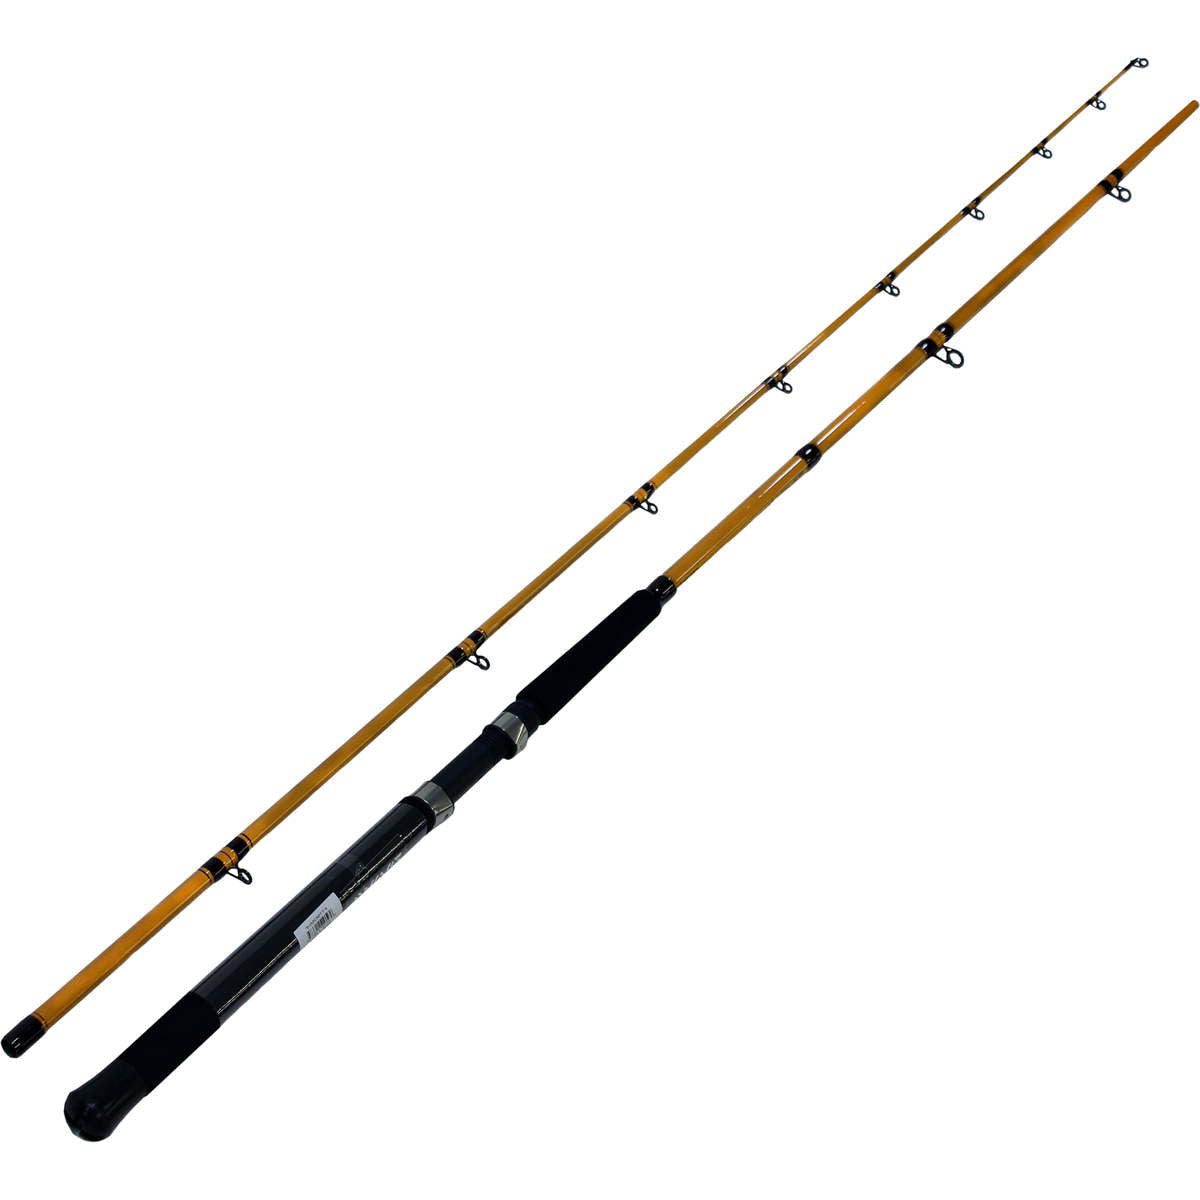 Daiwa FT Trolling Series Dipsey Diver Rod - United Tackle Shops